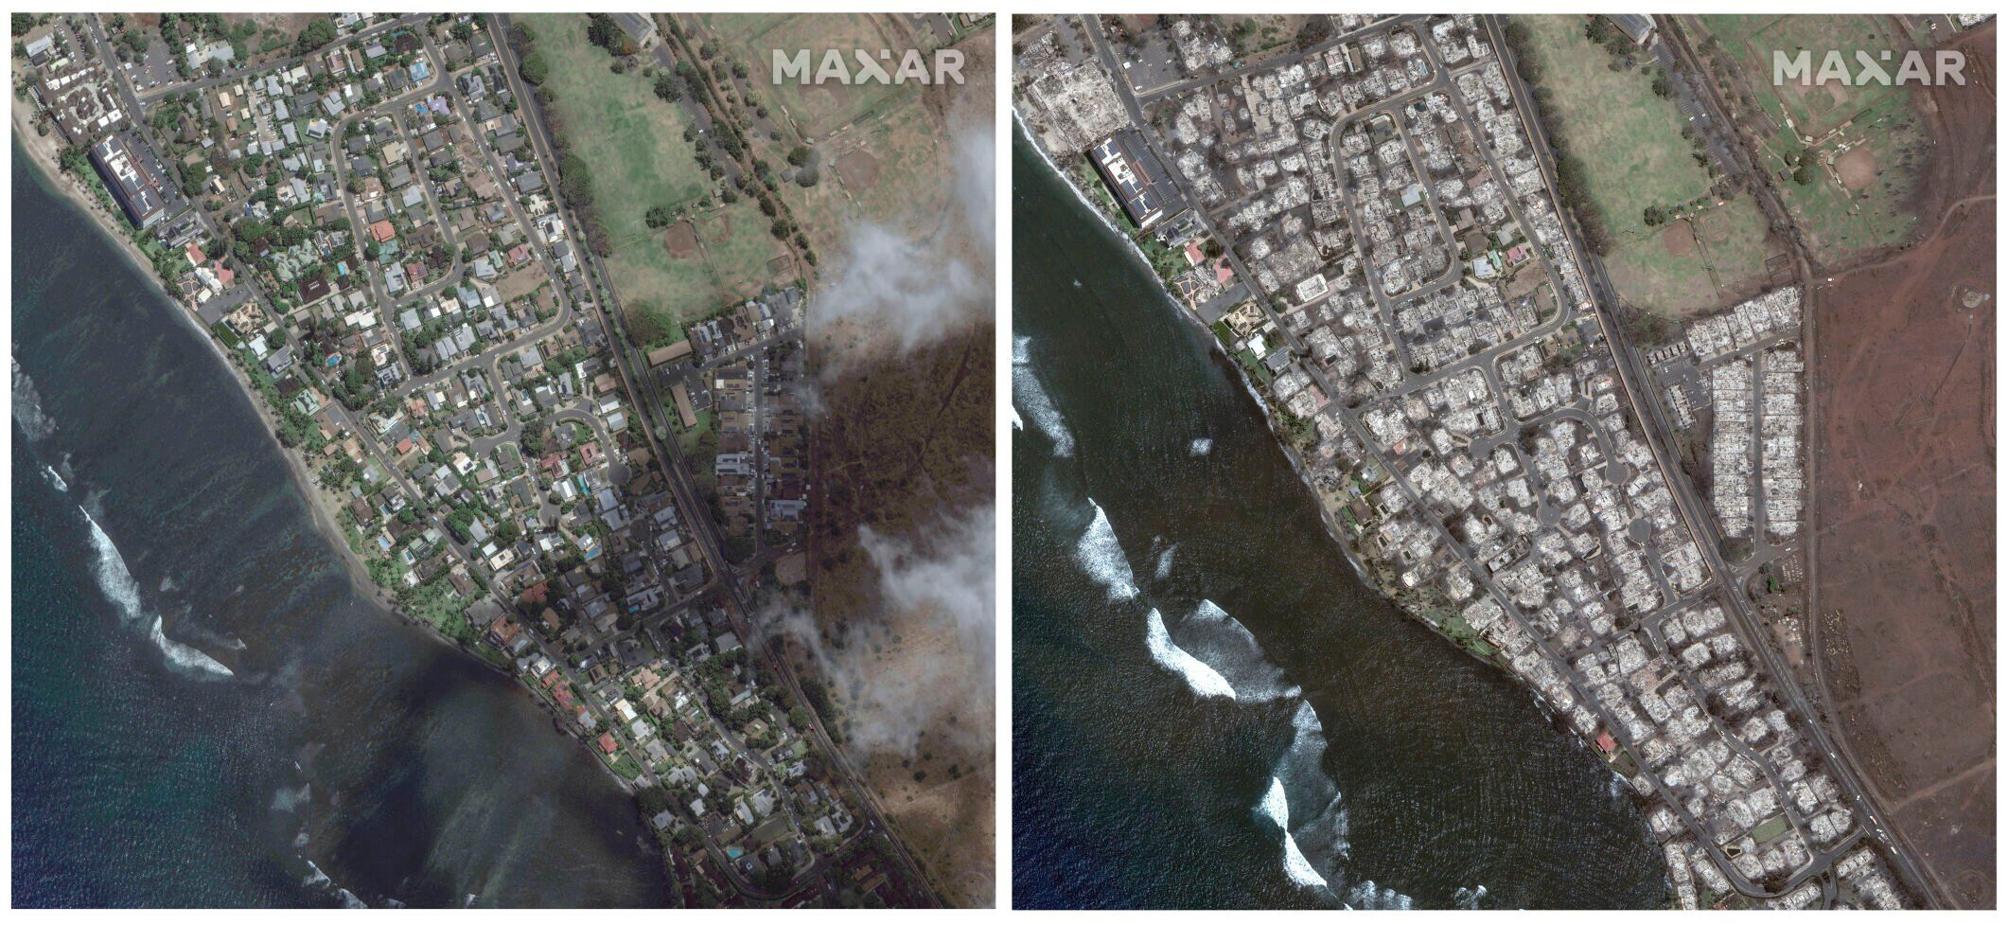 Maui fire before-and-after satellite photos show devastation